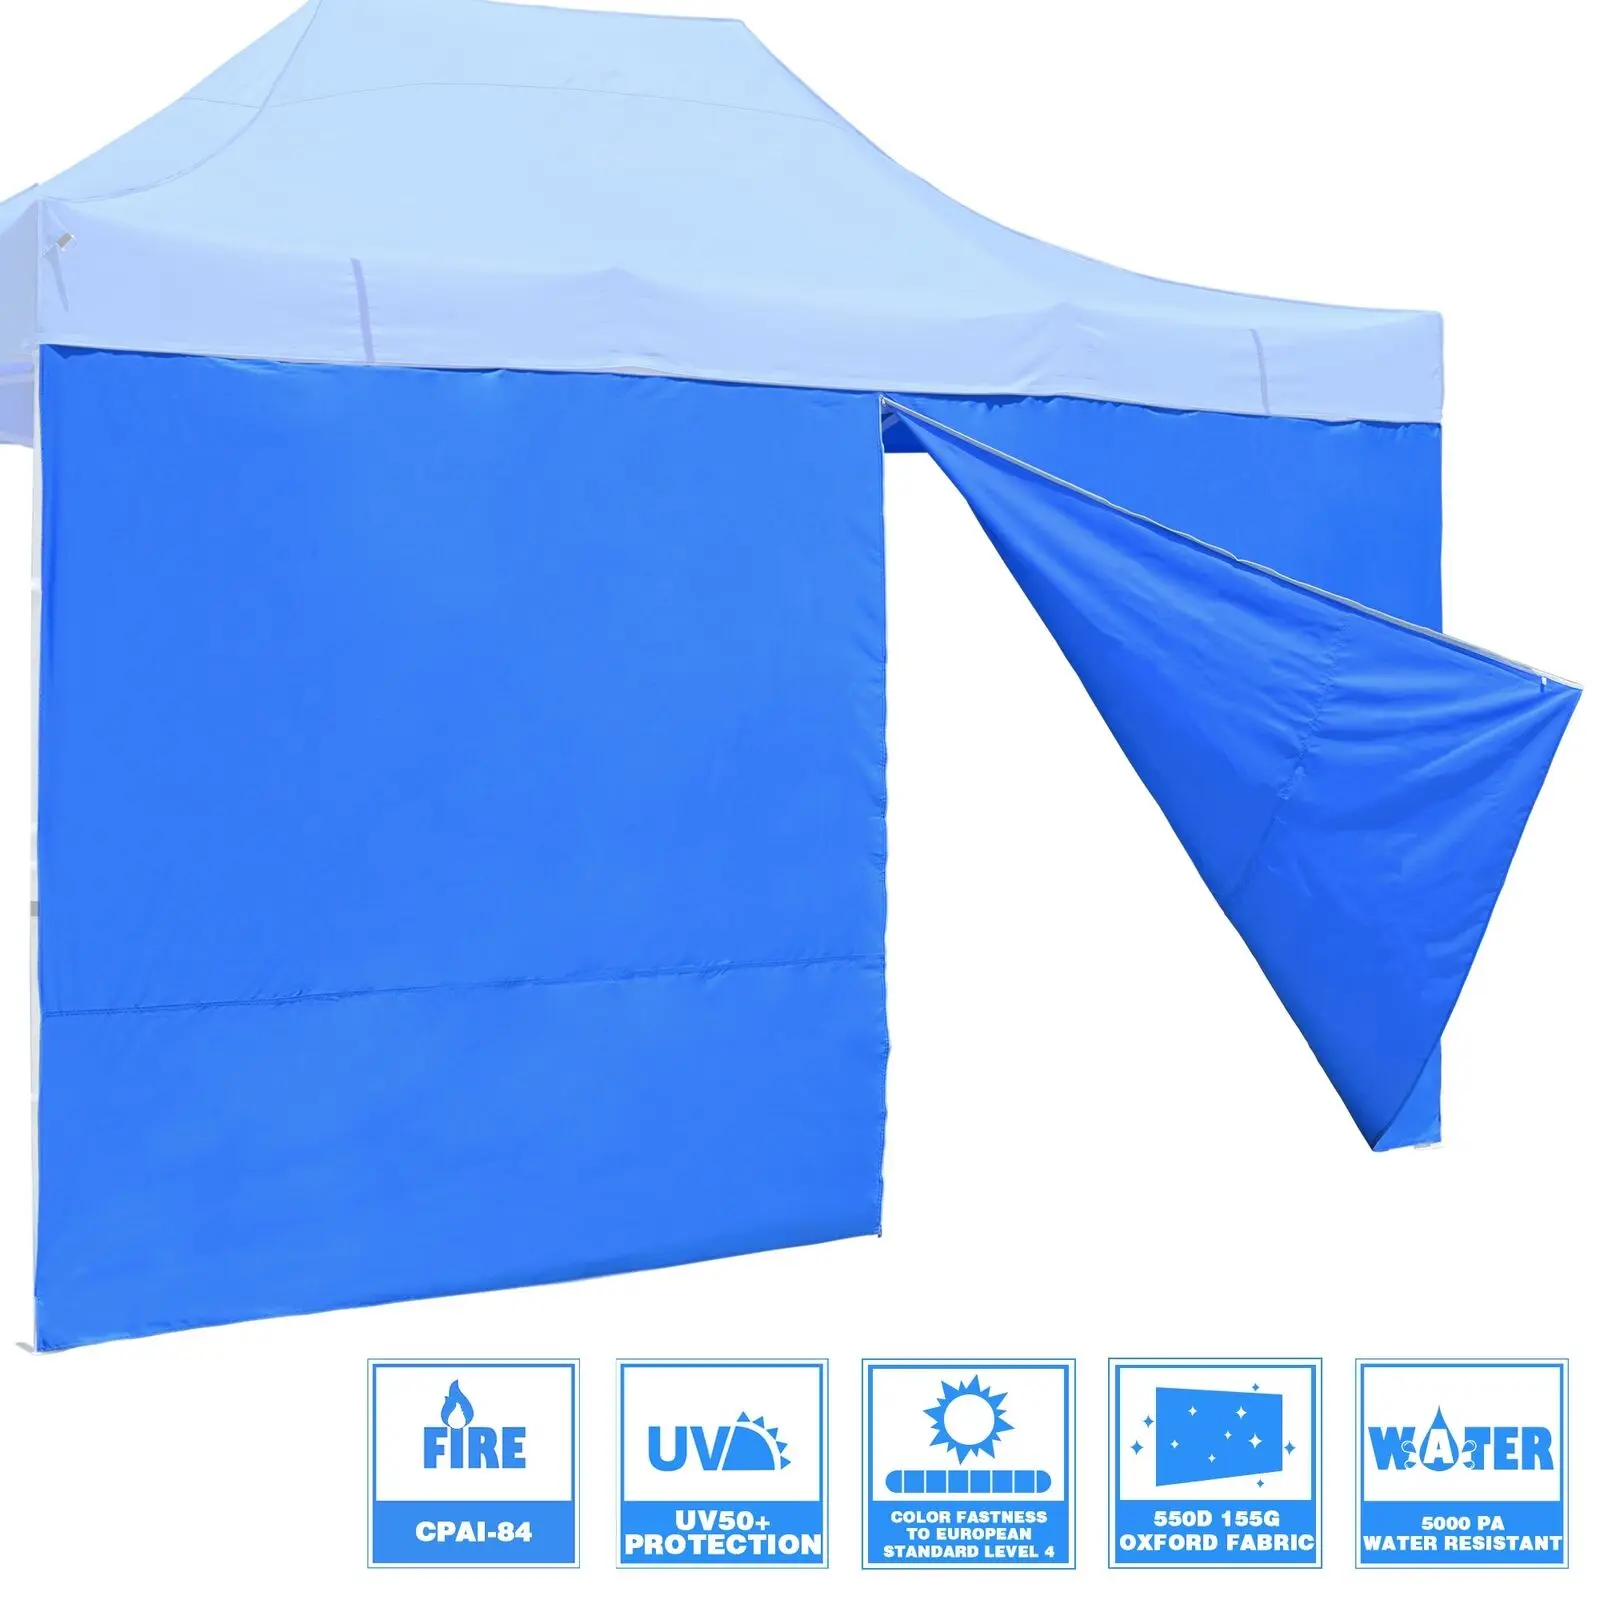 

15x7ft Oxford Fabric Canopy with Zipper UV50+ Protection Sidewall Panel Blue